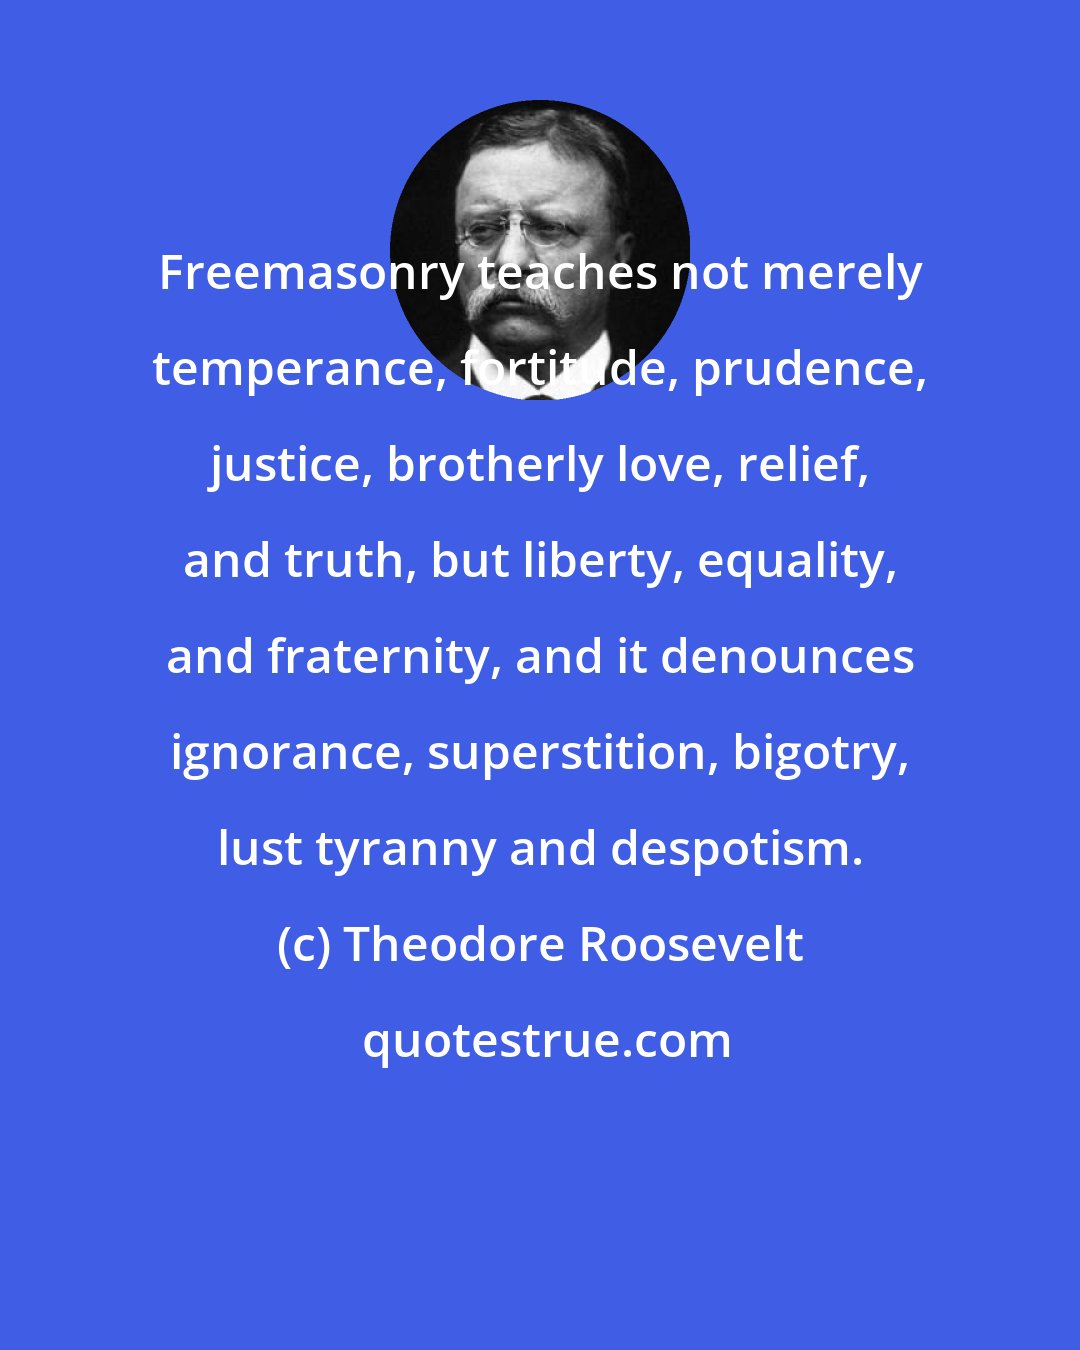 Theodore Roosevelt: Freemasonry teaches not merely temperance, fortitude, prudence, justice, brotherly love, relief, and truth, but liberty, equality, and fraternity, and it denounces ignorance, superstition, bigotry, lust tyranny and despotism.